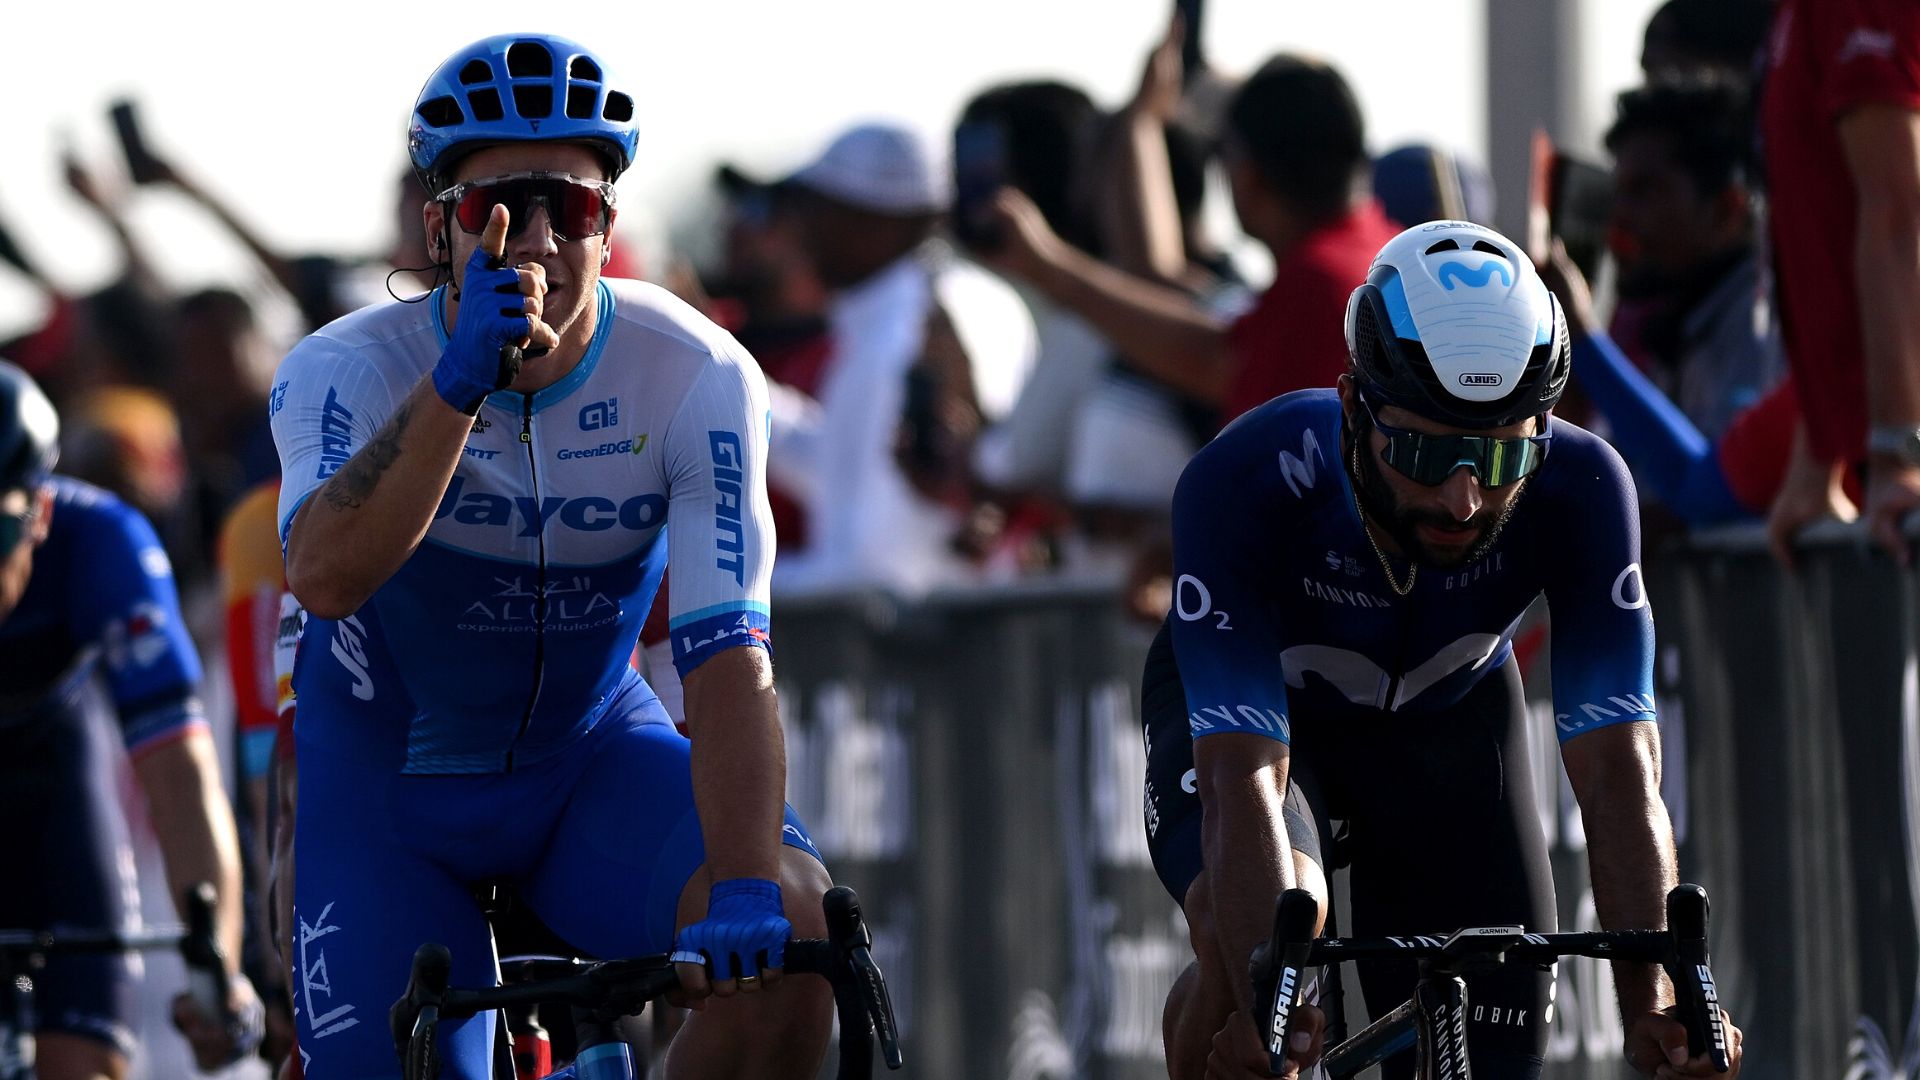 The Colombian rider was second in the fifth stage of the UAE Tour.  @Movistar_team (Getty Sport) - Twitter